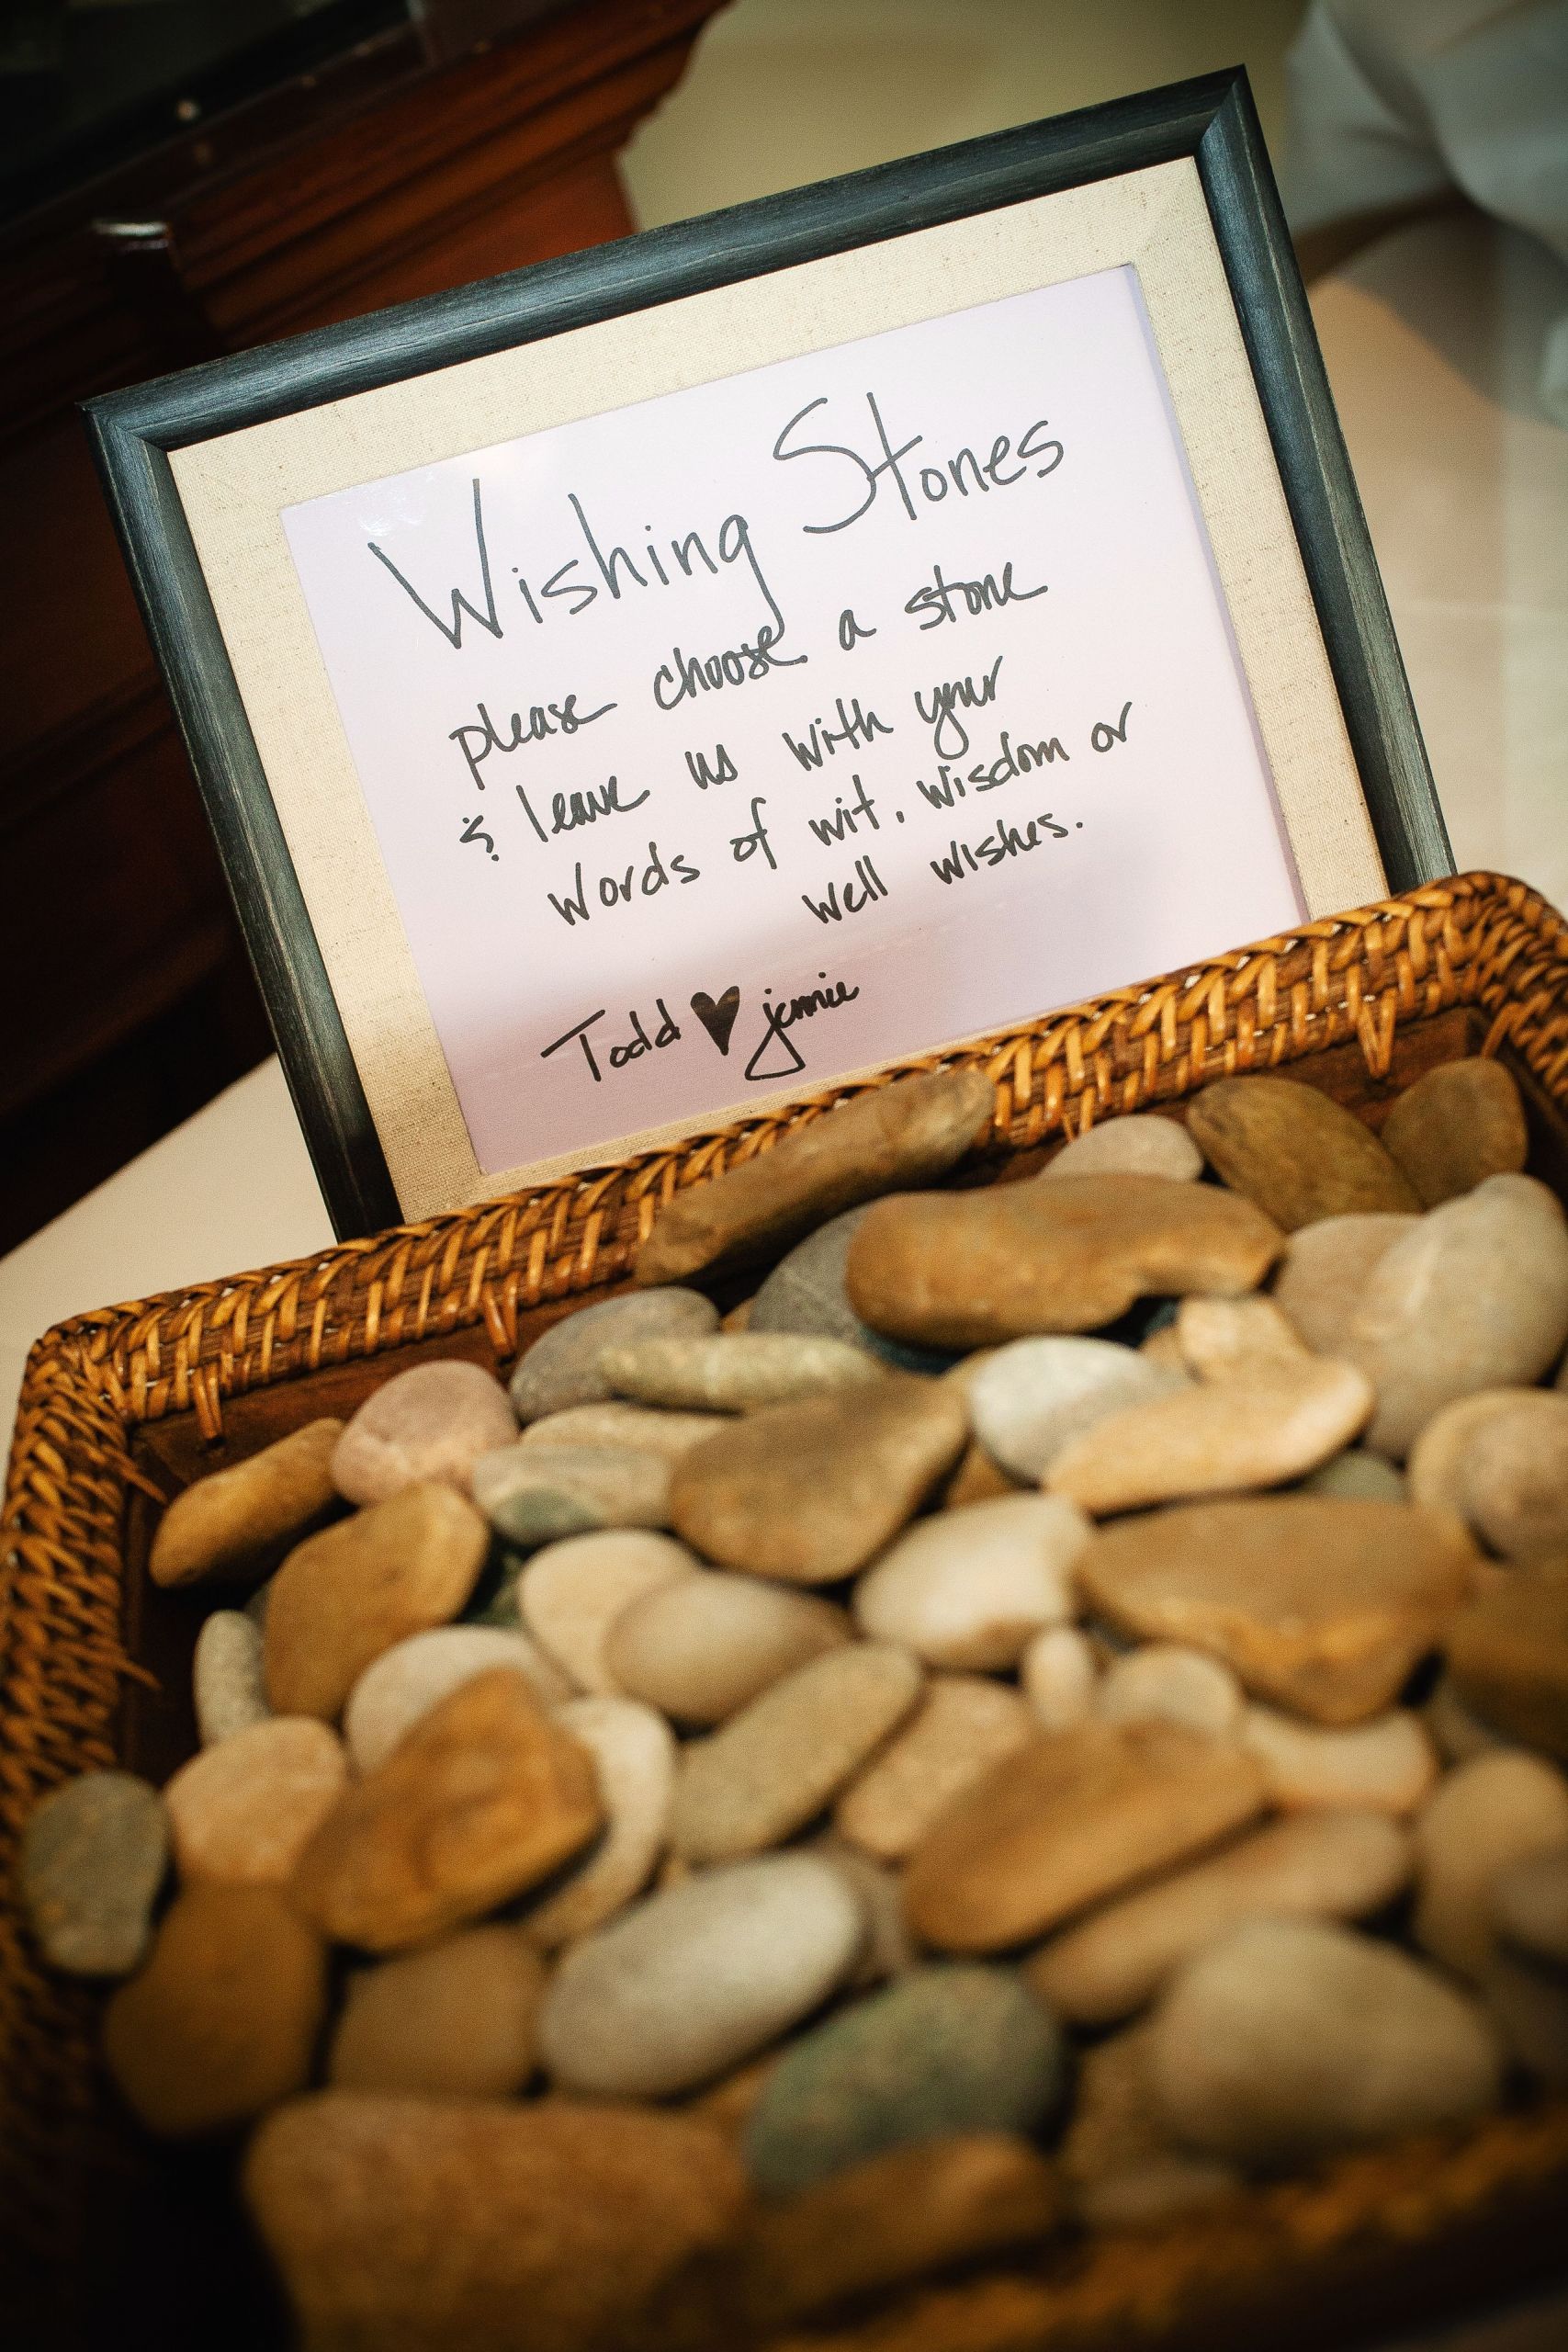 Wedding Guest Book Rocks
 A creative twist for a guest book Wishing Stones for